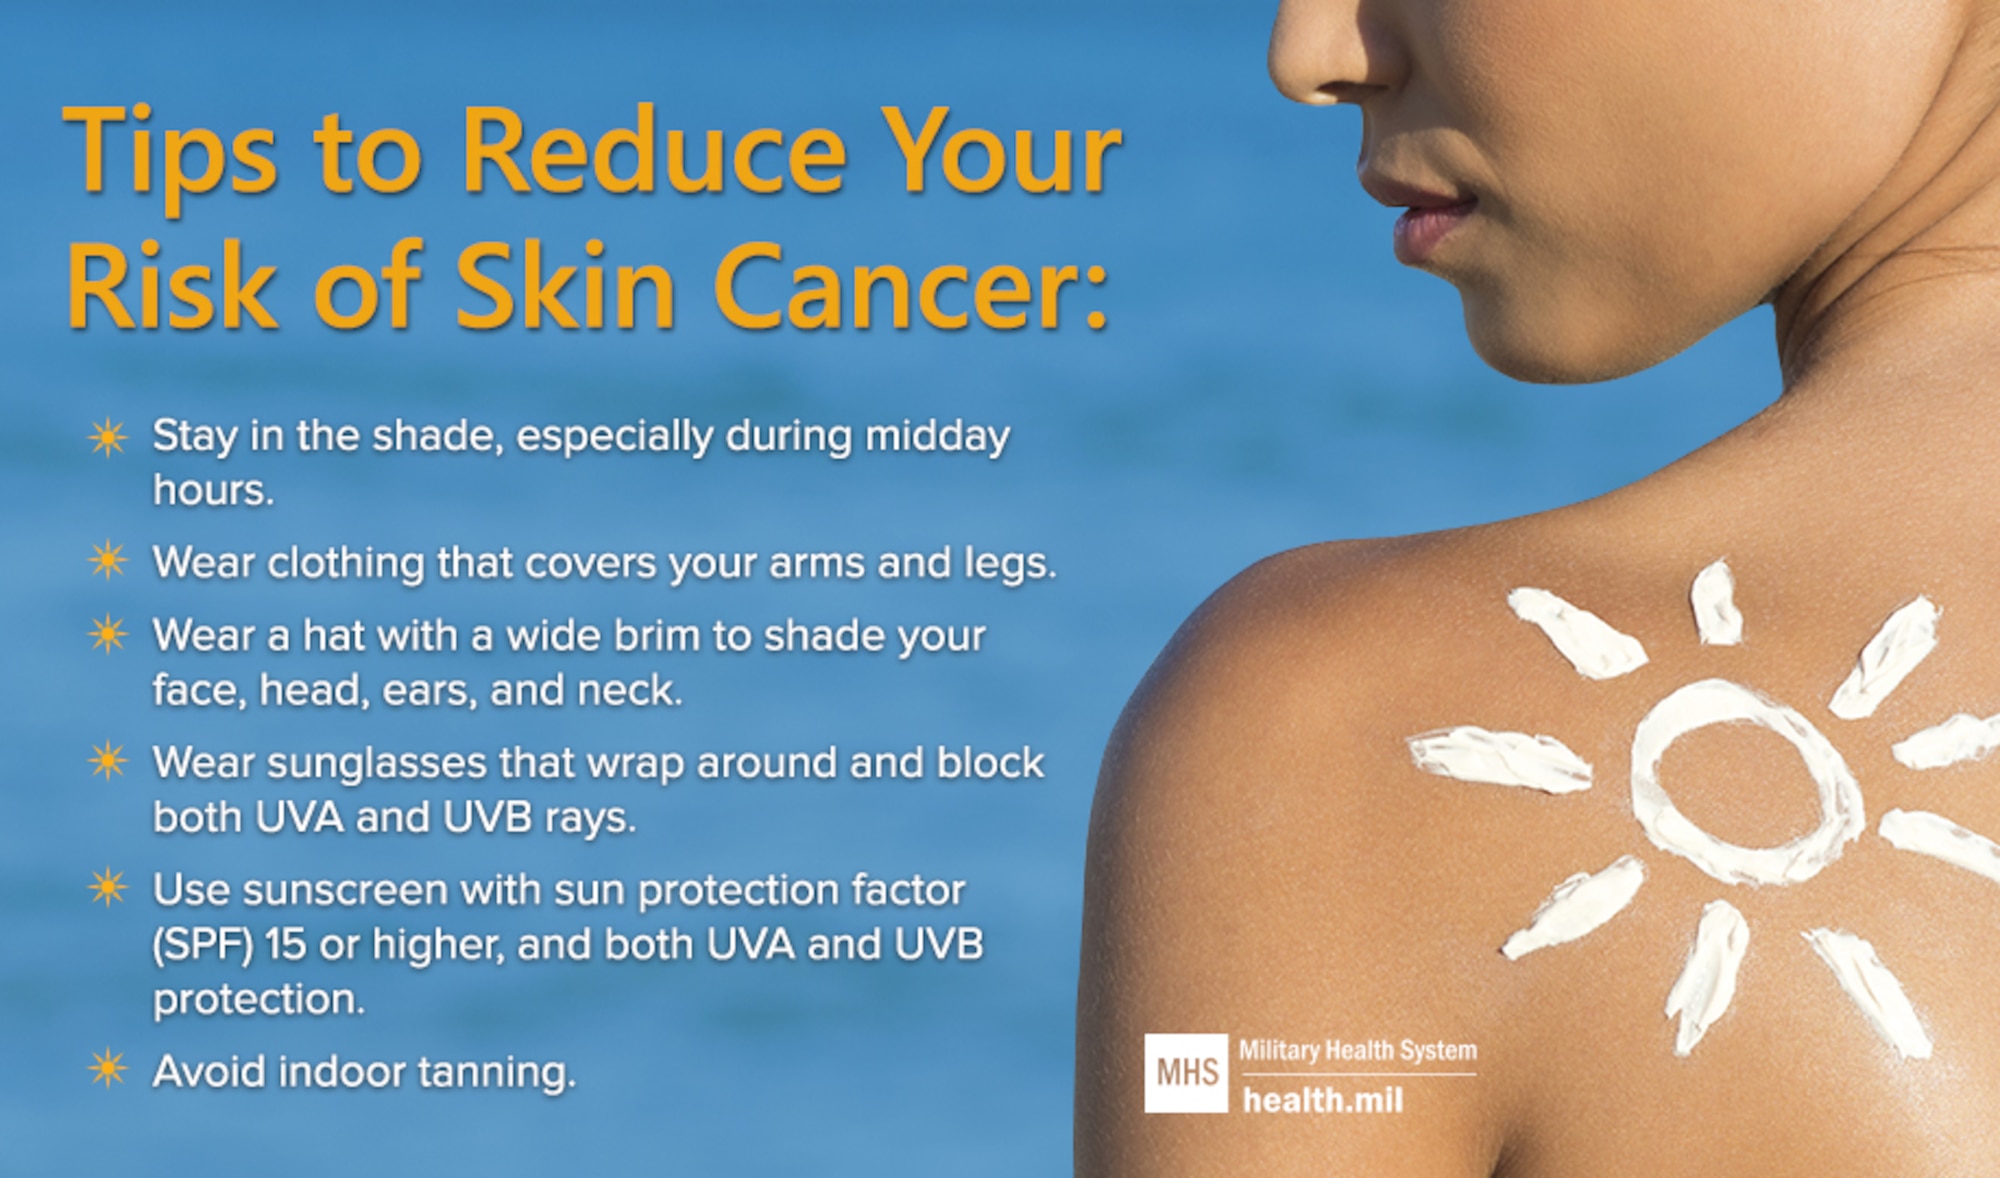 Tips for Protecting Your Skin This Summer